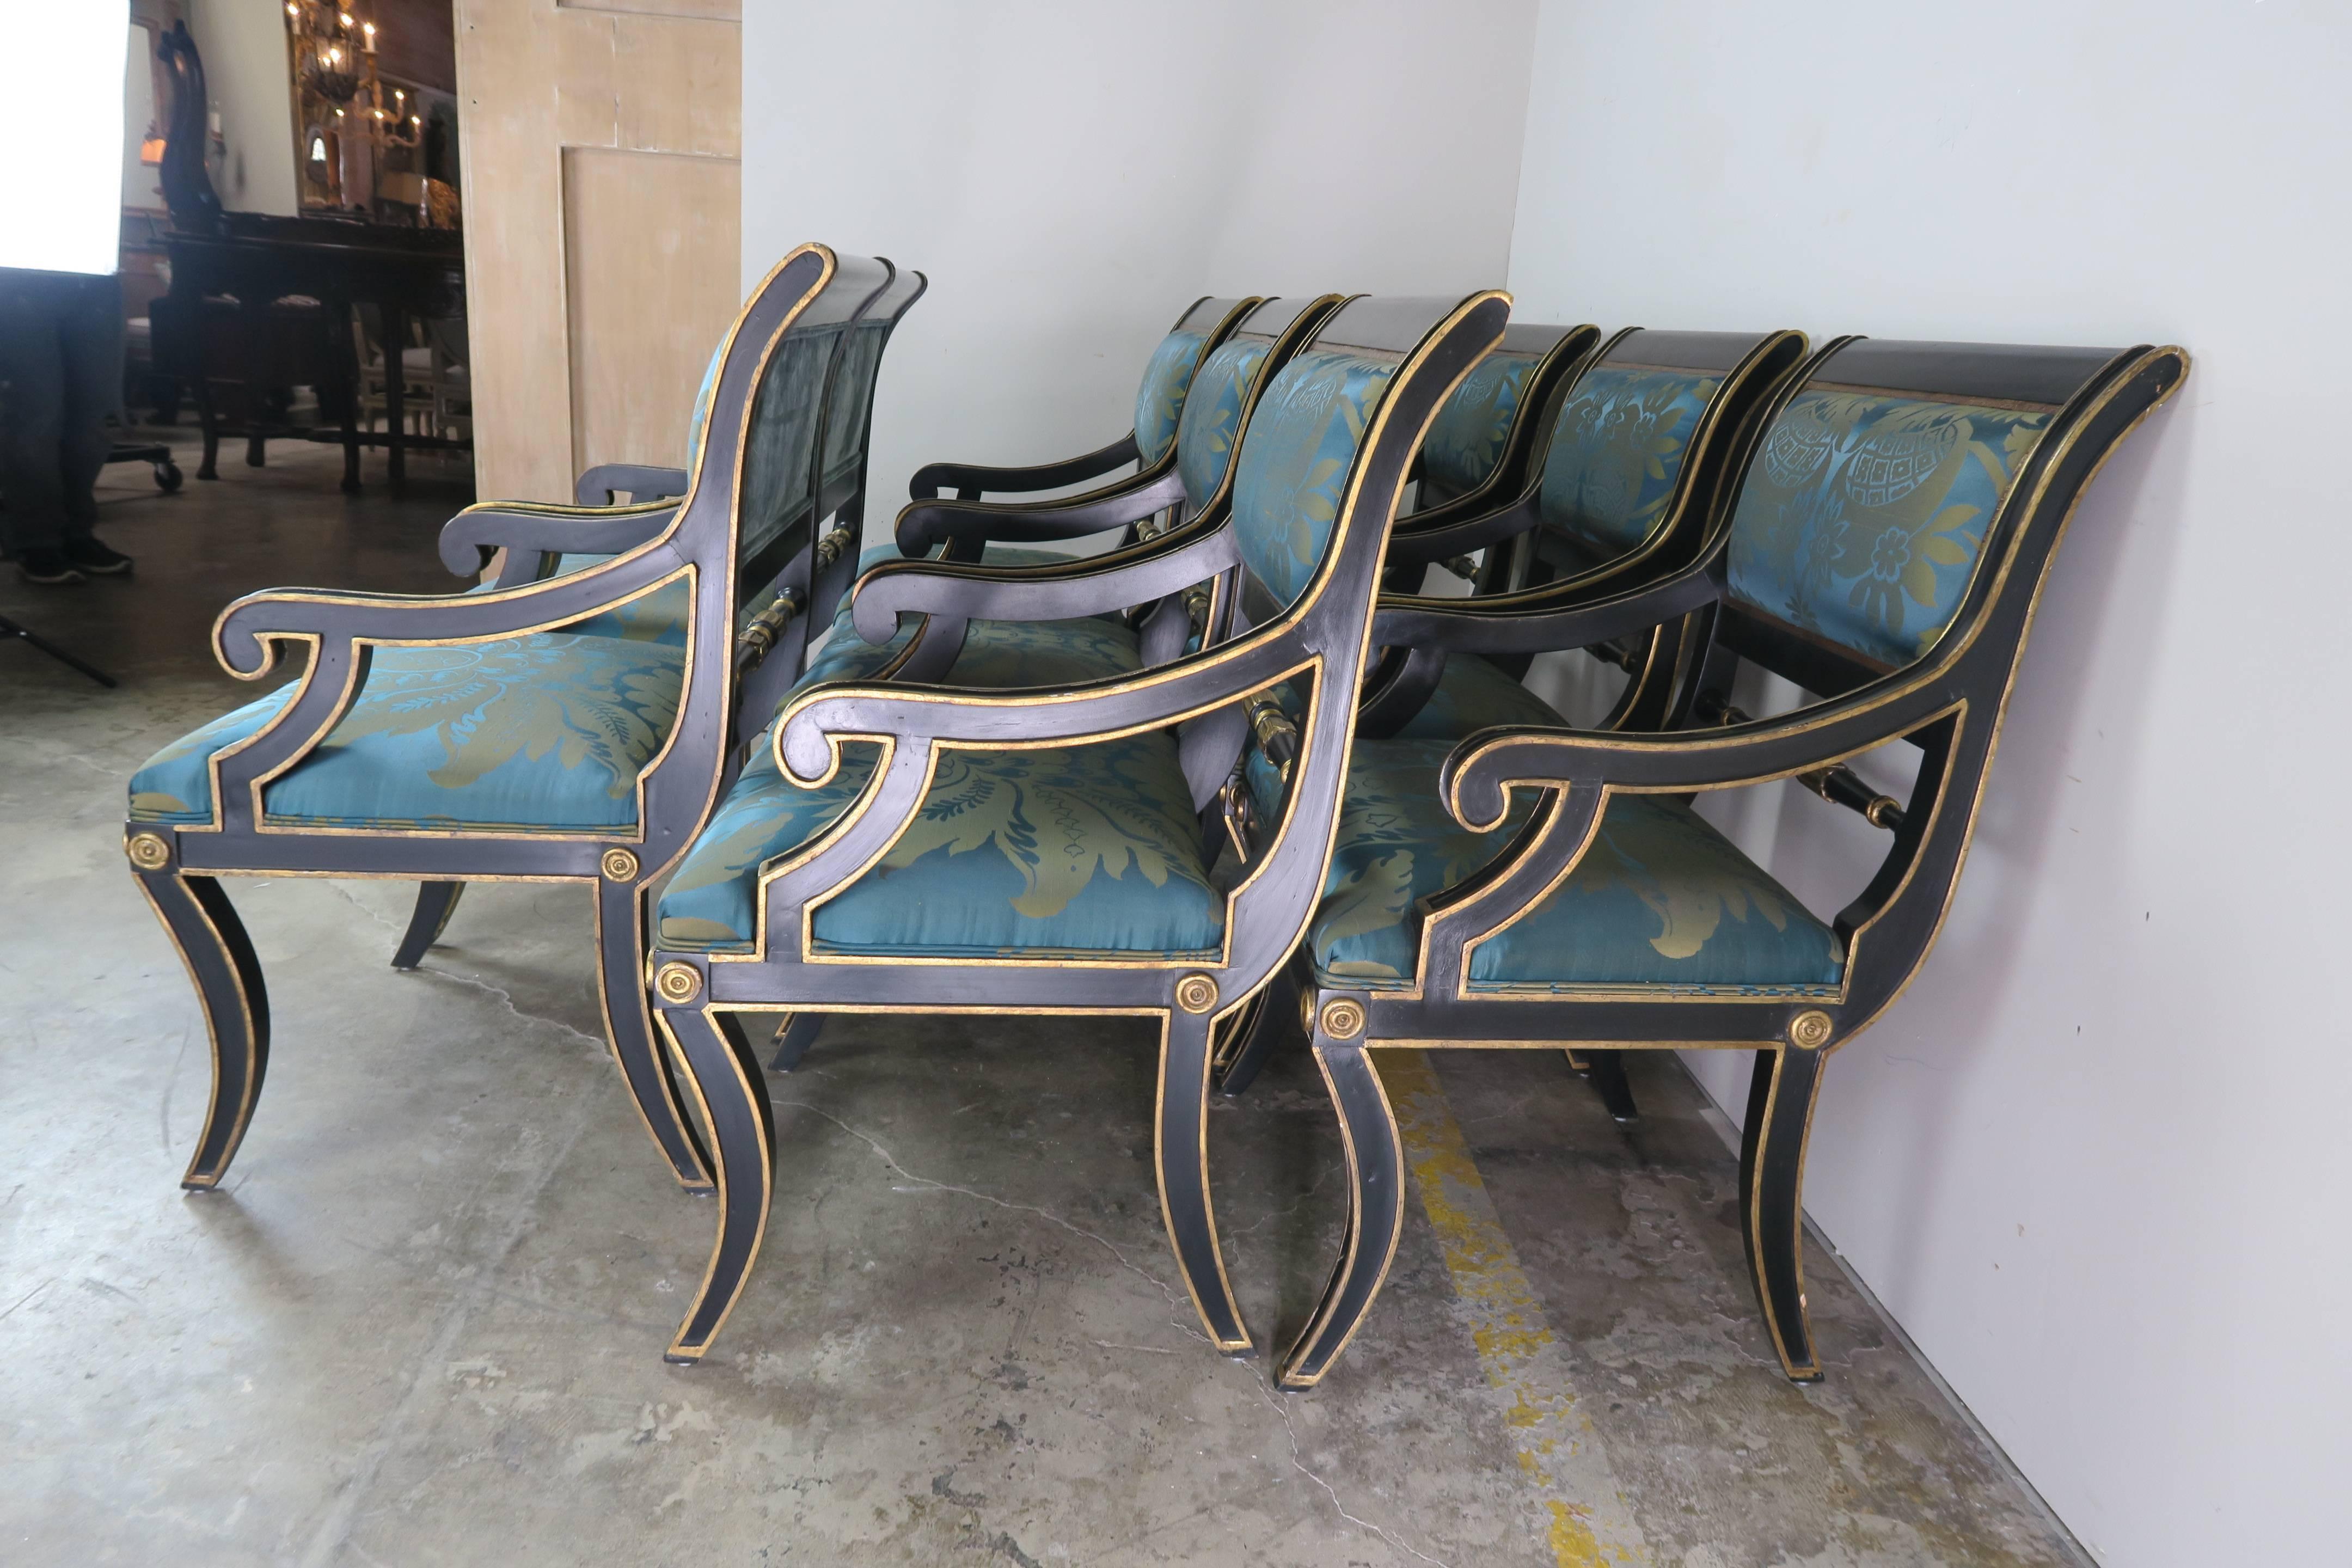 Set of Eight Italian Regency black lacquered and gold gilt armchairs newly upholstered in a high-end silk damask with aqua colored silk velvet backs. A beautiful set that is ready to install.